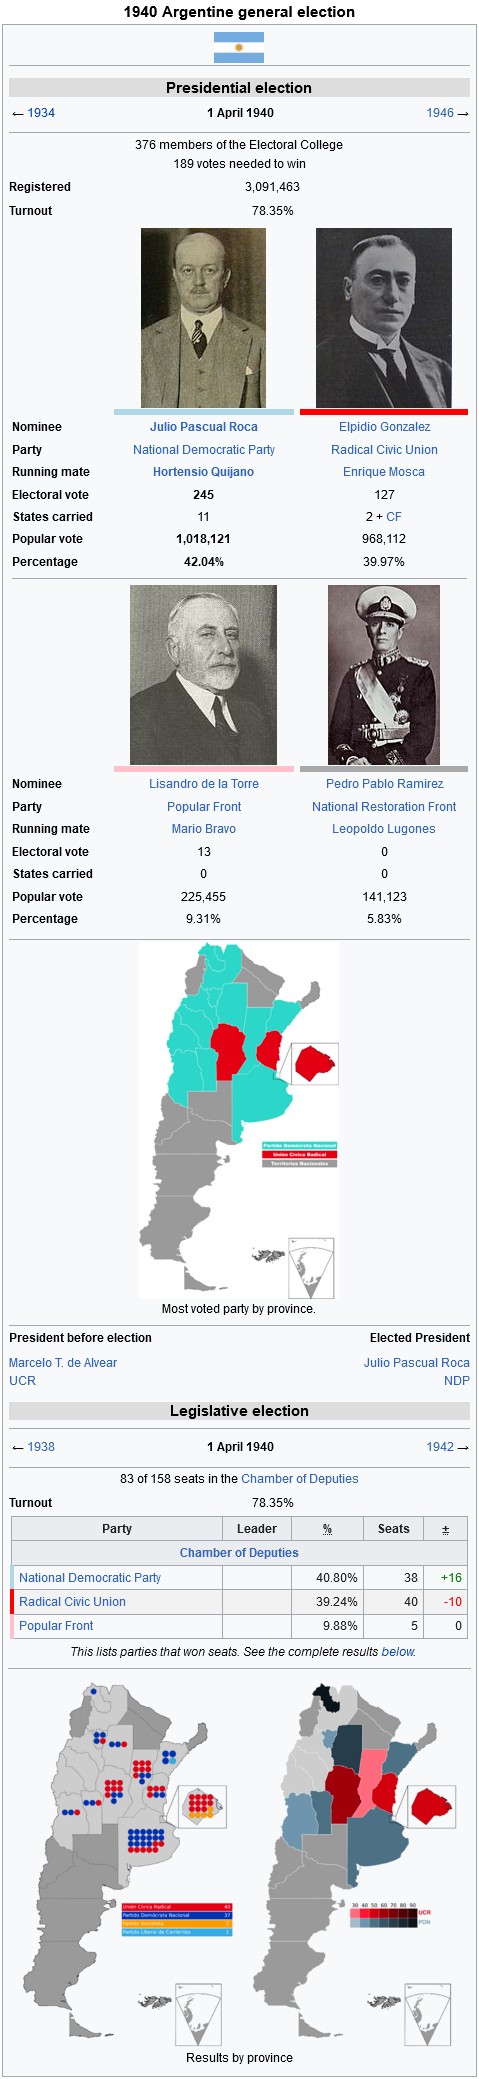 1940 Argentina General Election (No Coup).png